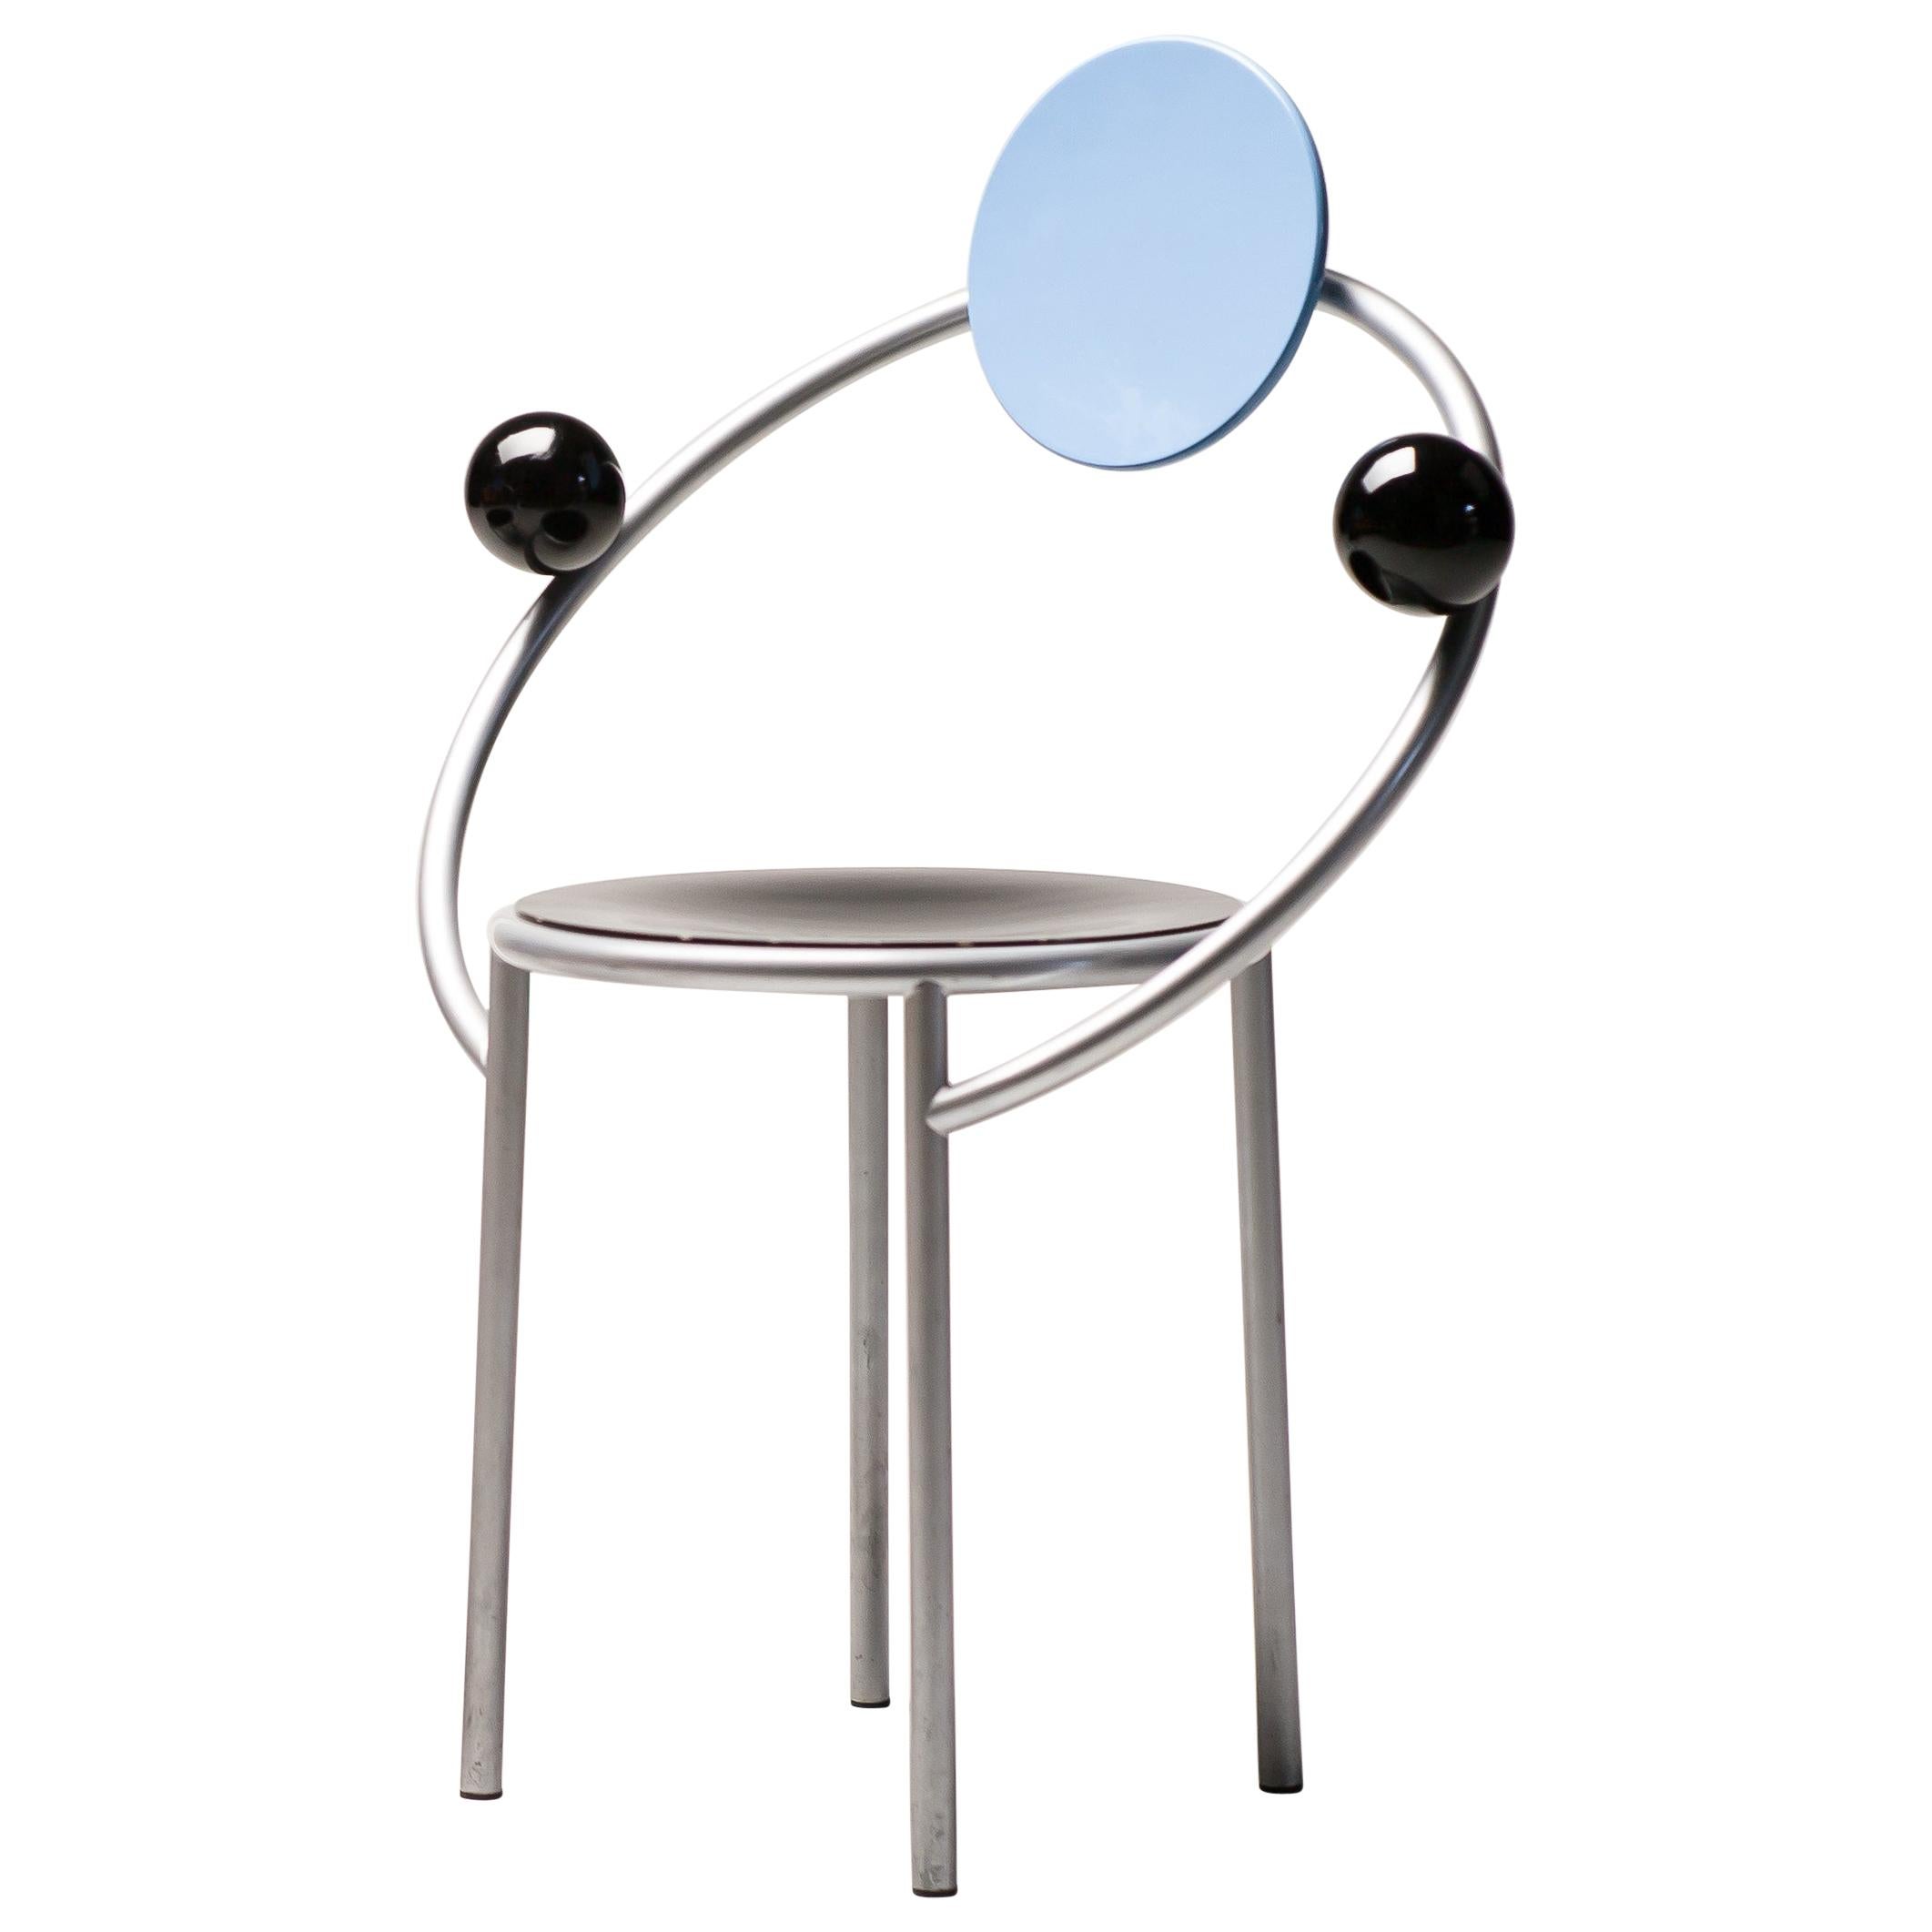 First Chair by Michele De Lucchi for Memphis, Marked